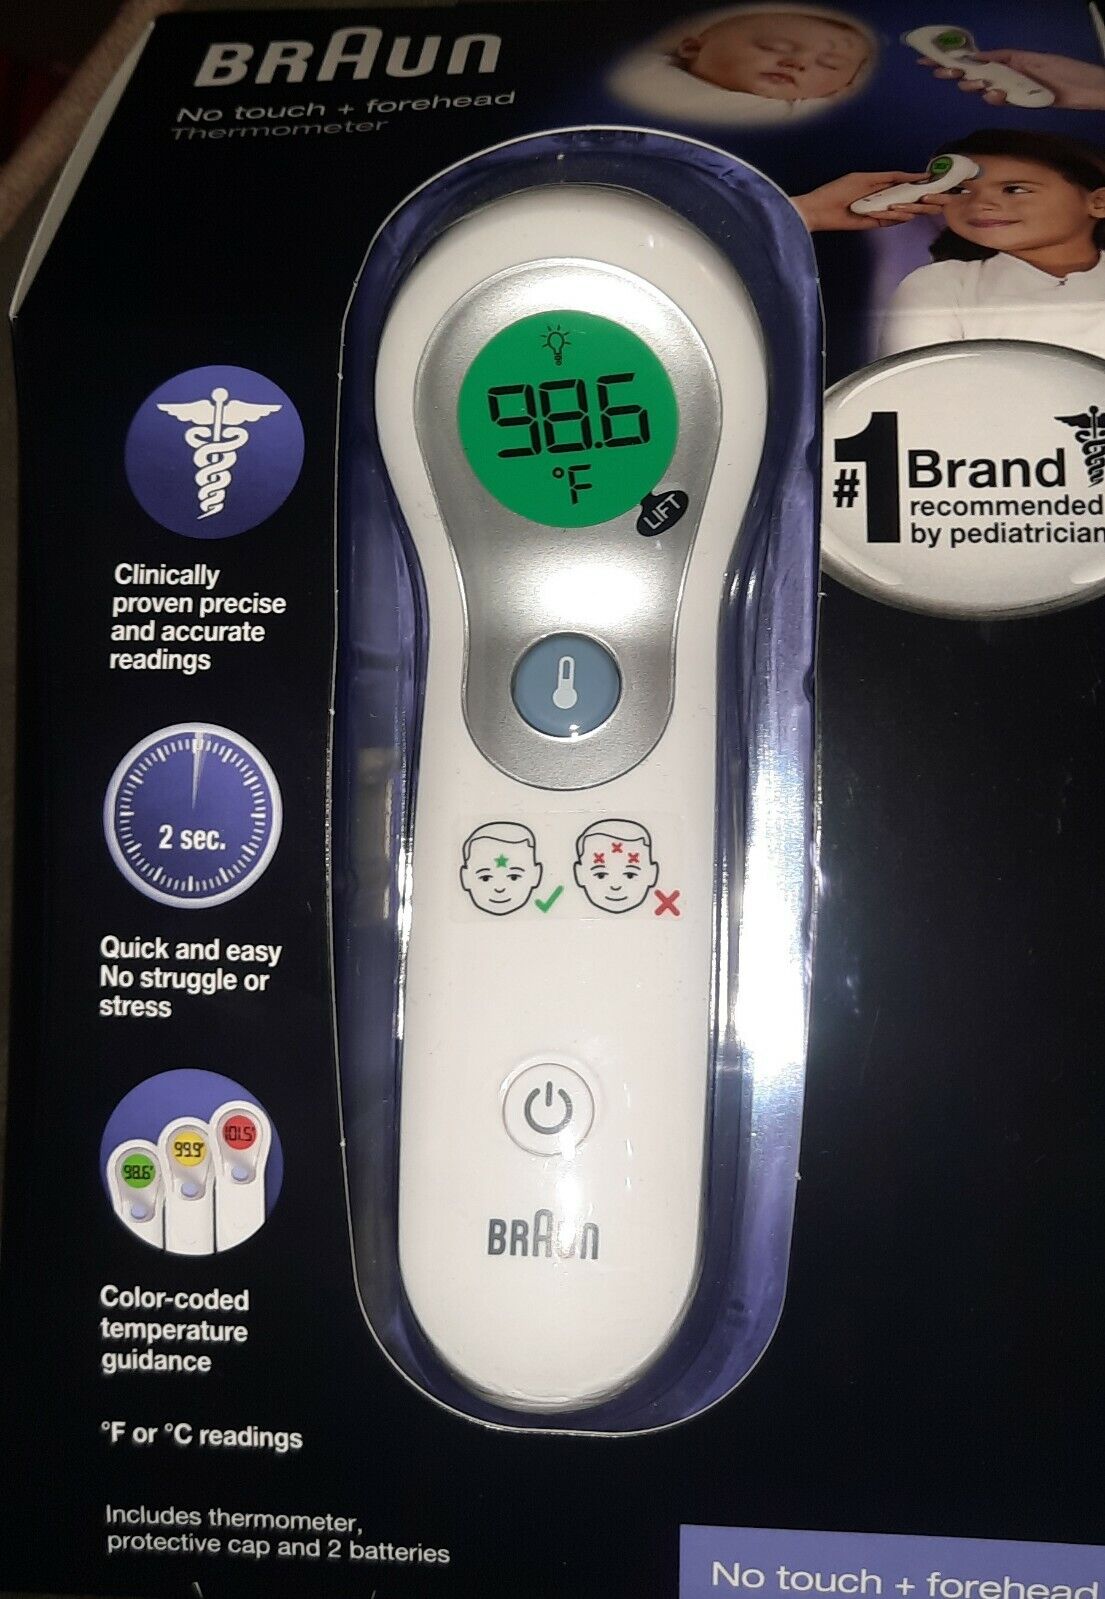 New Braun No Touch + Forehead Thermometer | eBay